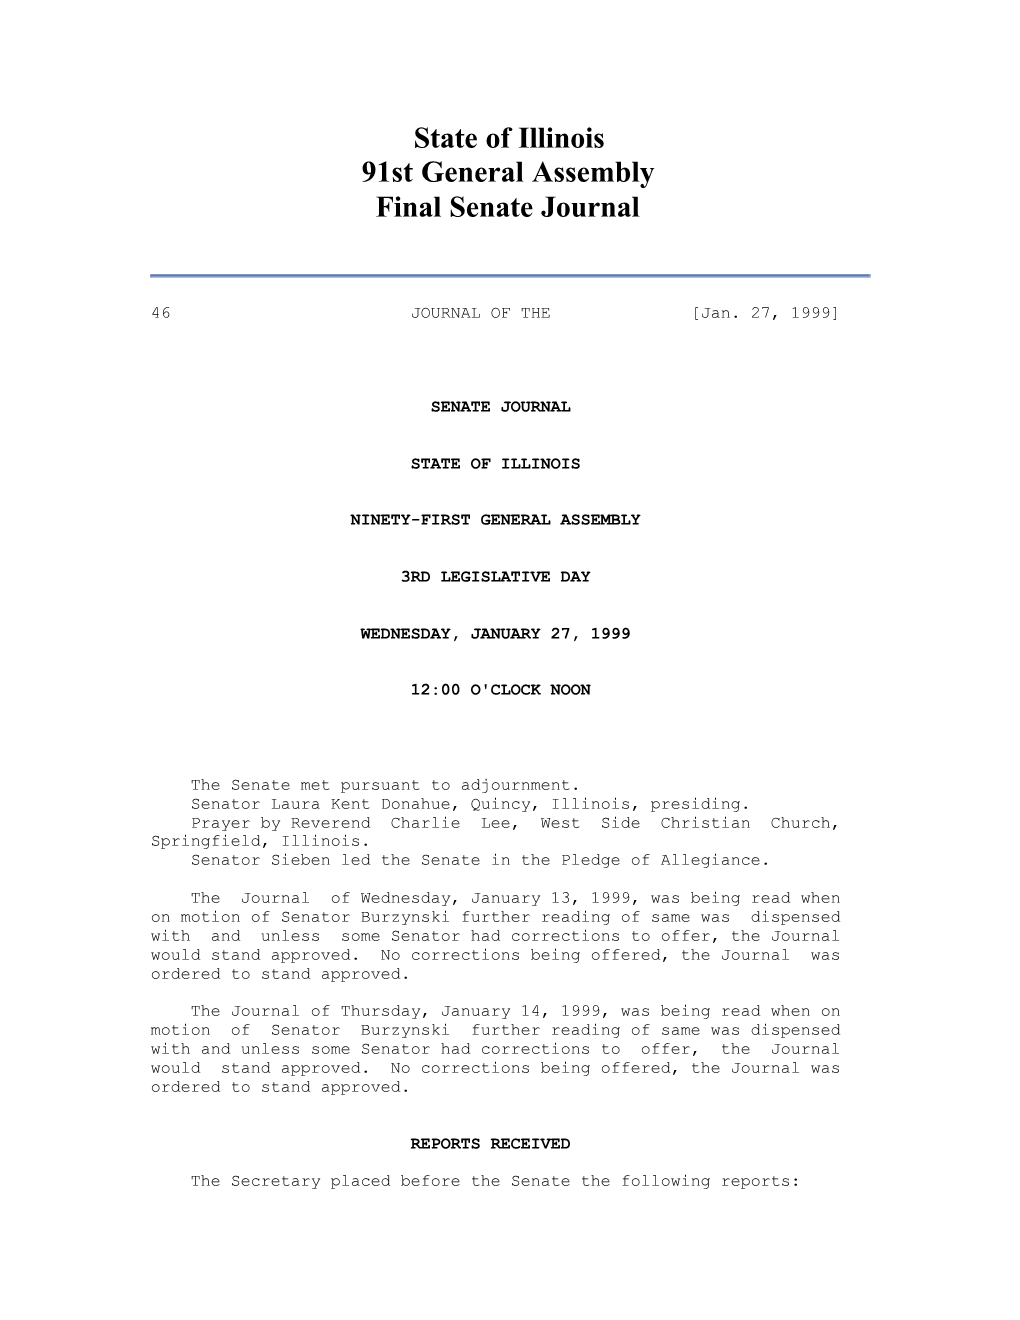 State of Illinois 91St General Assembly Final Senate Journal